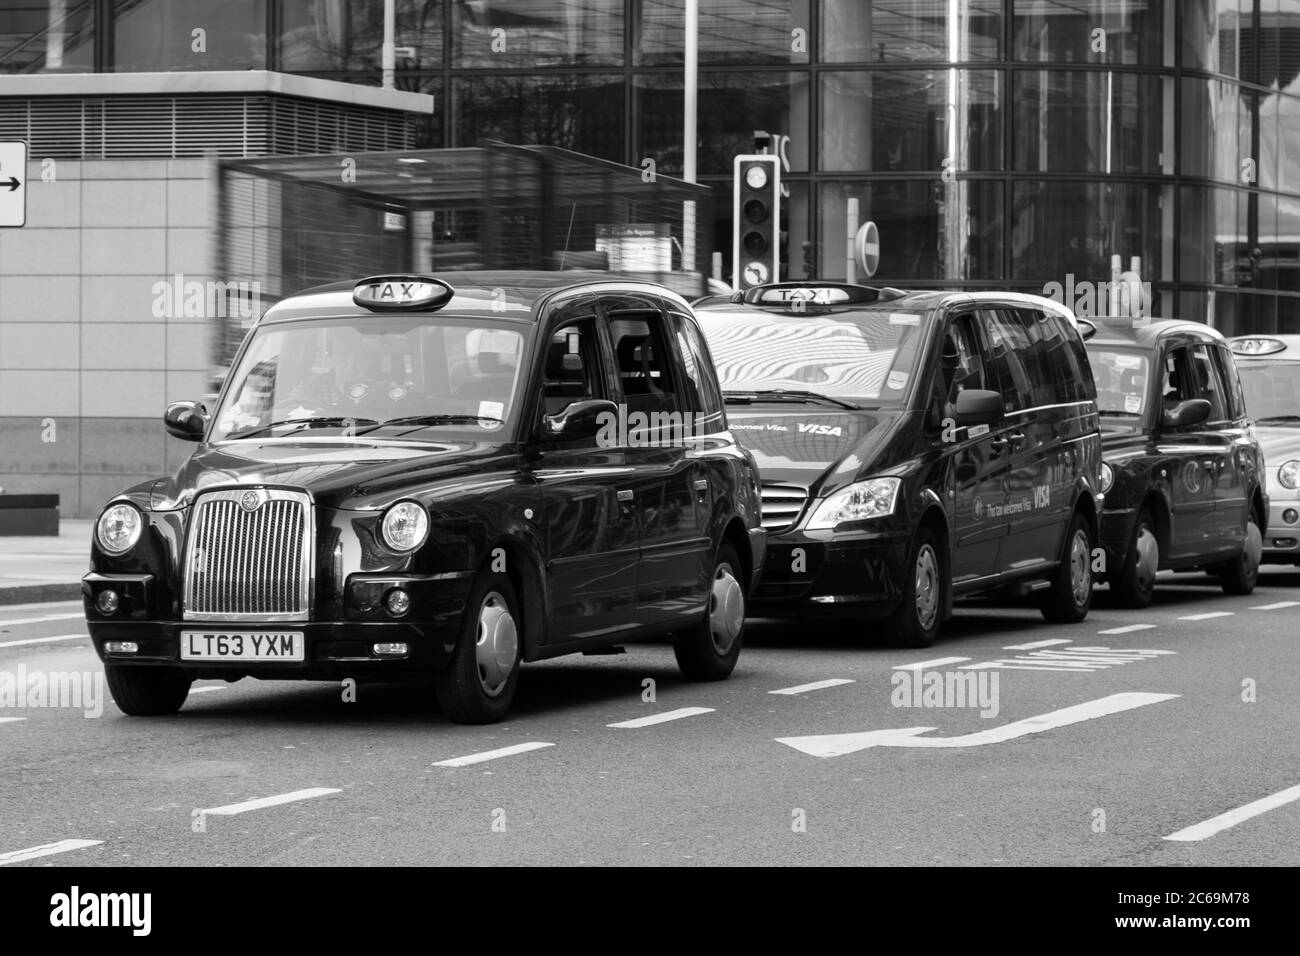 LONDON, UK - 9TH MARCH 2014: A row of Taxis pakred outside some buildings in London during the day Stock Photo